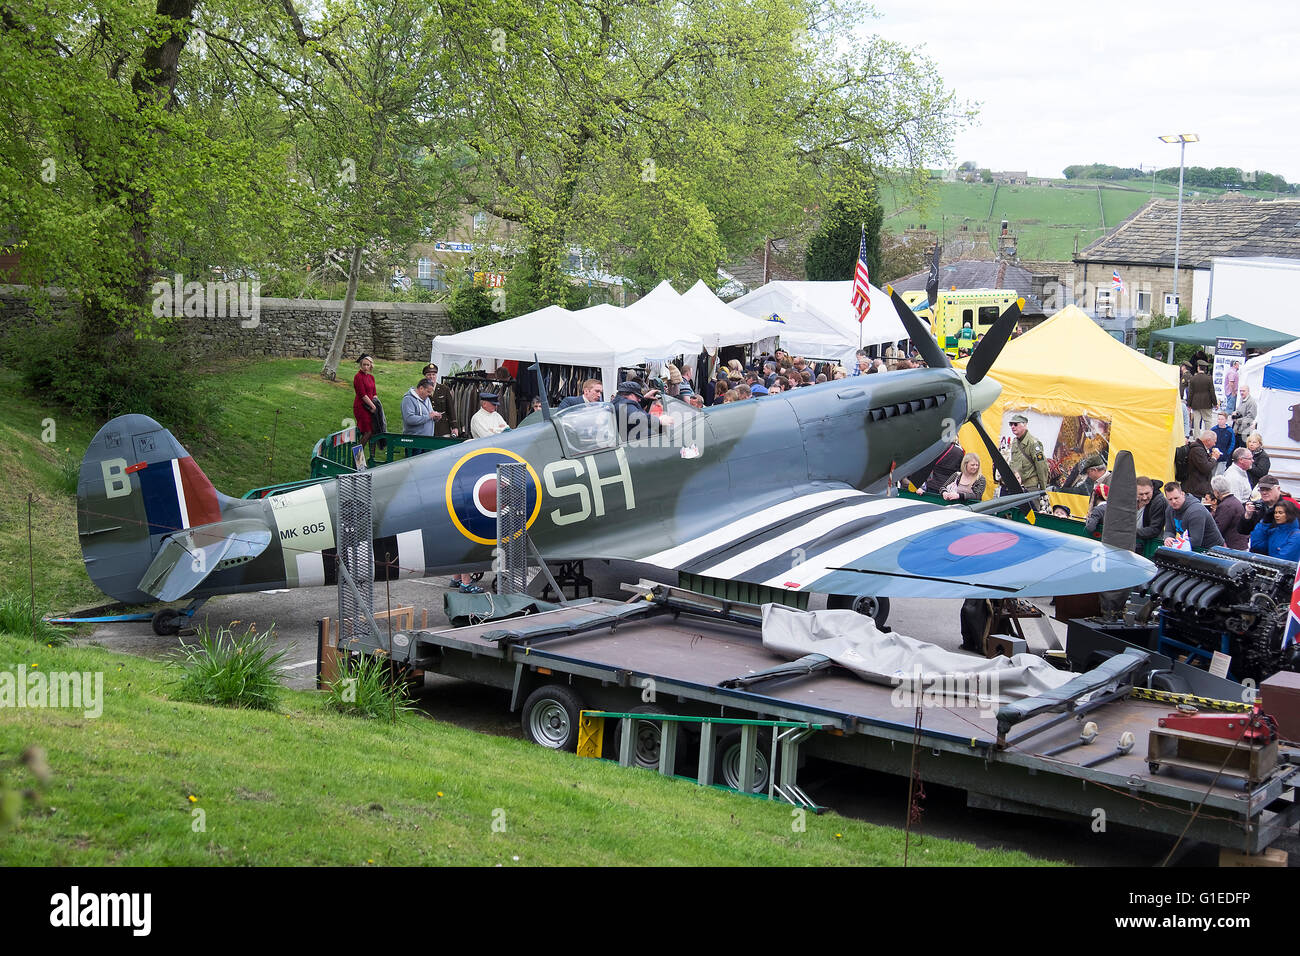 Haworth, Yorkshire, UK. 14th May, 2016. The village of haworth, west yorkshire, is transformed for the annual 1940’s weekend. Mk805 Spitfire wows the crows as part of the weekends program, Credit:  Light-Phase Photography/Alamy Live News Stock Photo